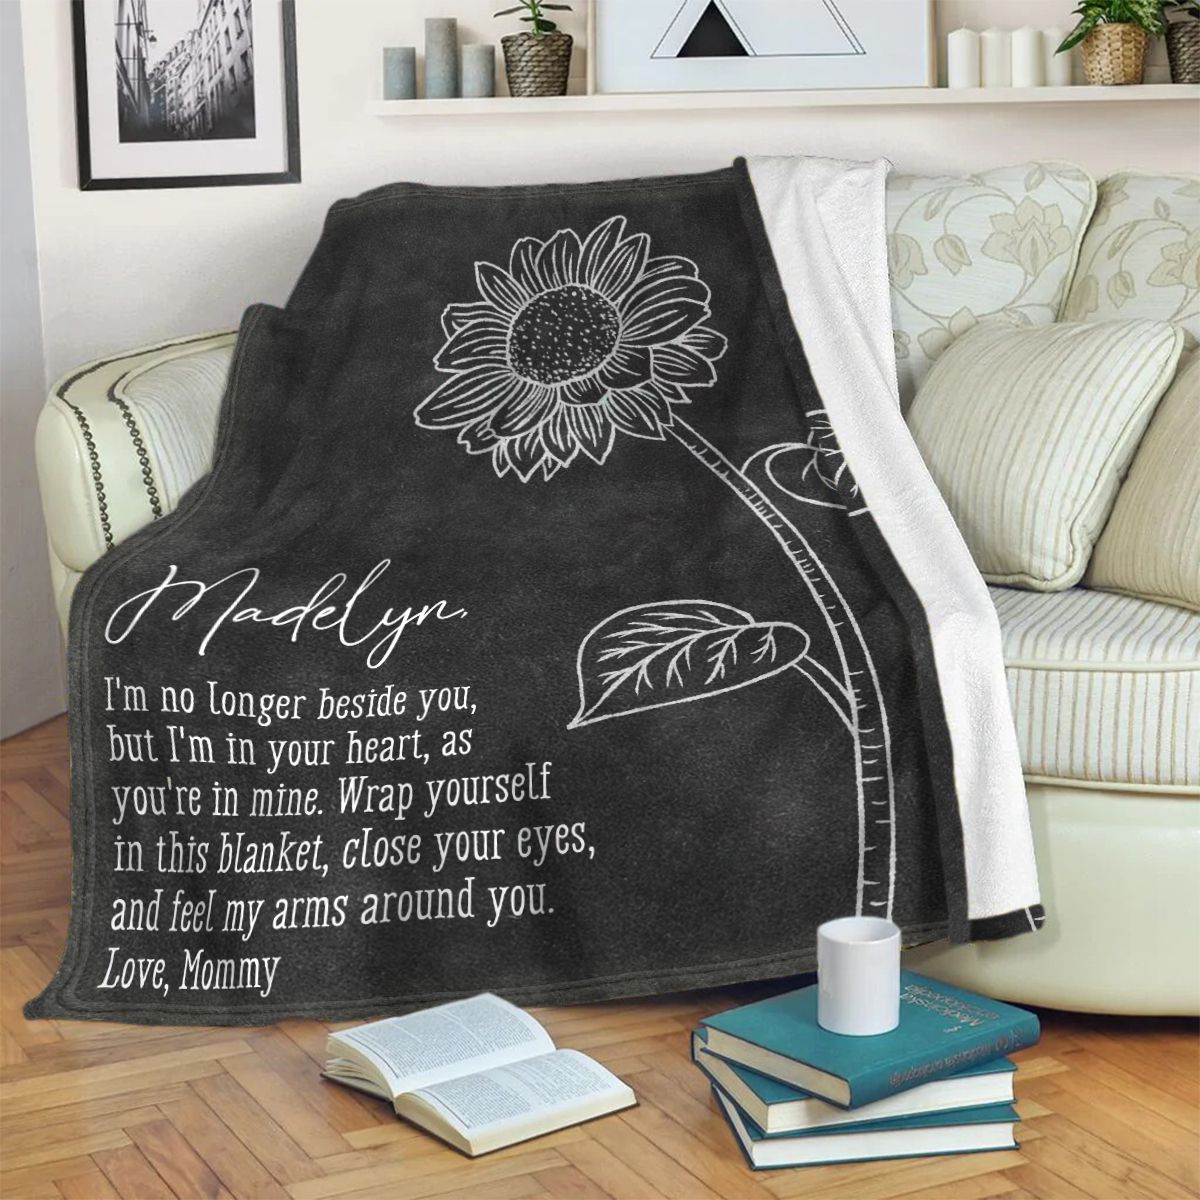 Beautiful Gift For Loss Of A Mother Personalized Fleece Blanket